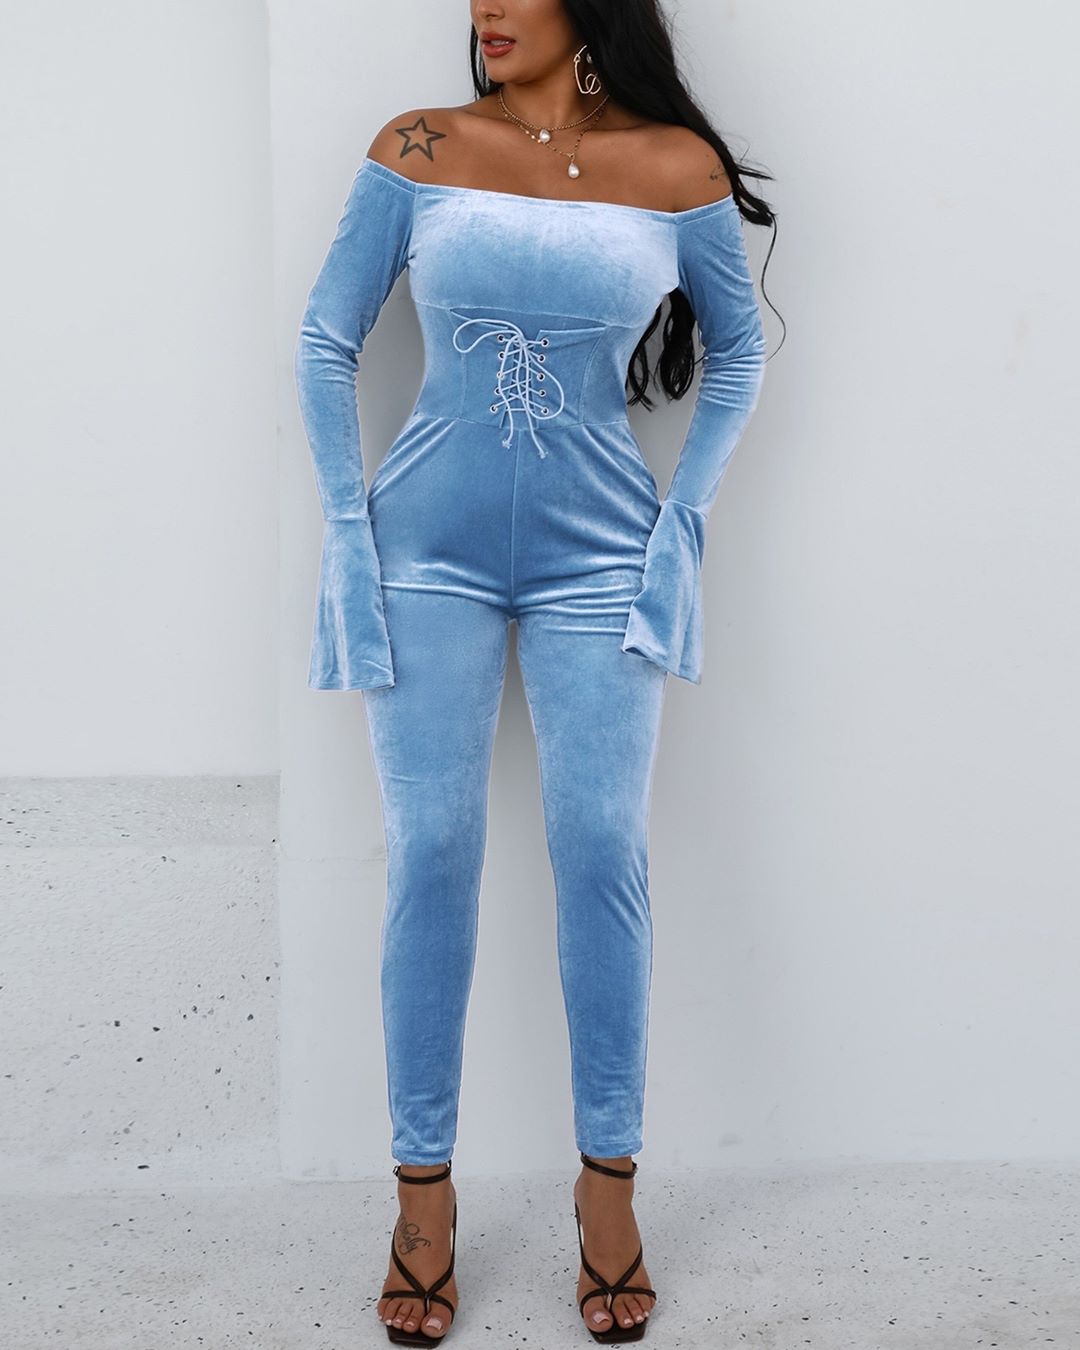 boutiquefeel_official - Must have staple alert.⁠
Shop Iteam🔍: LZD0567⁠
Shop:boutiquefeel.com⁠
 #fashion #ootd #style